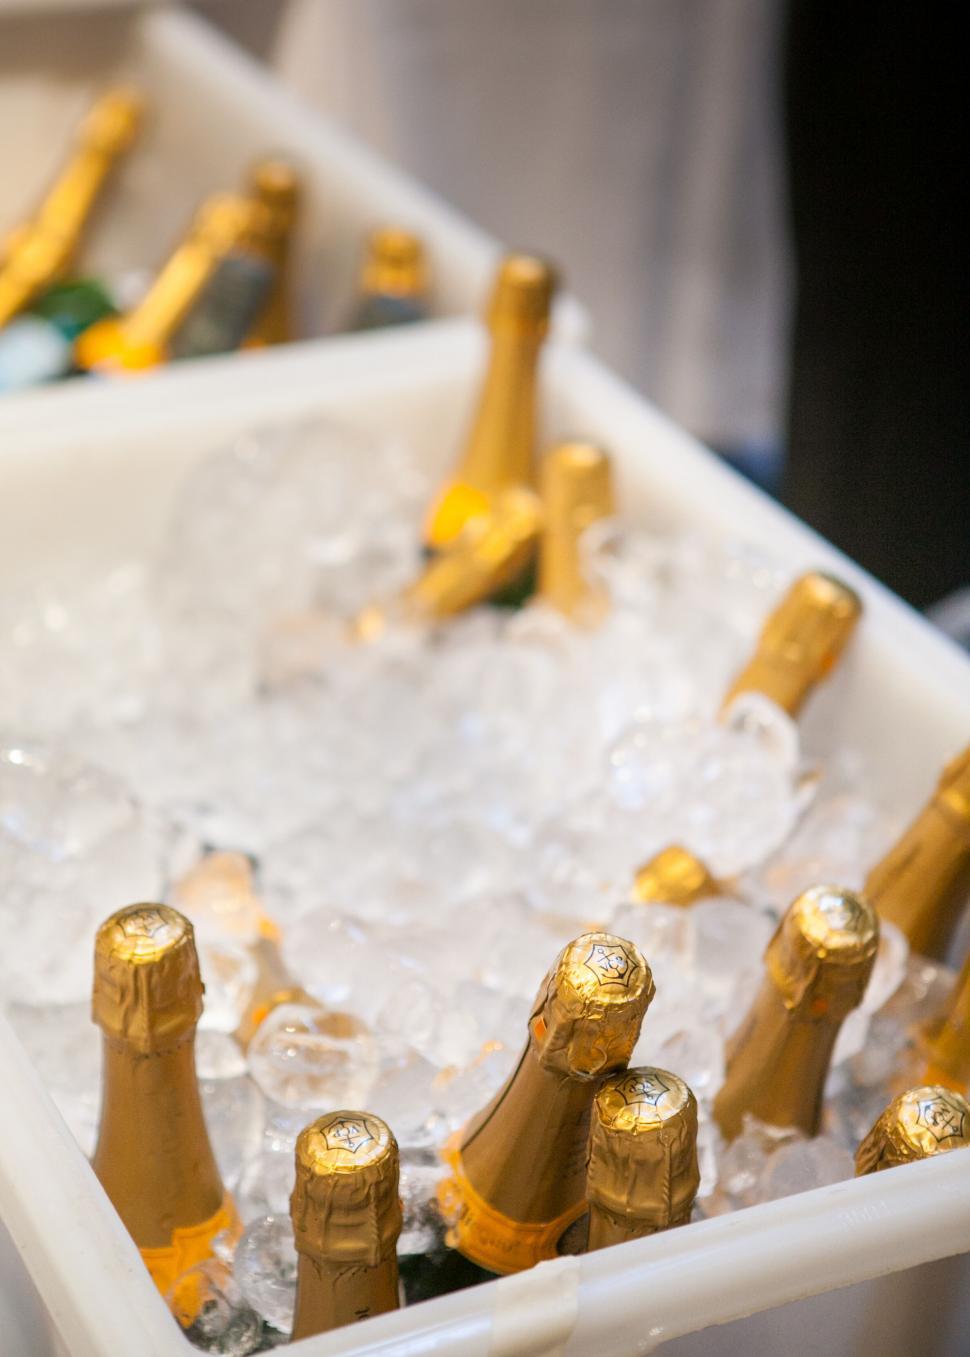 Free Image of Champagne bottles chilled on ice 